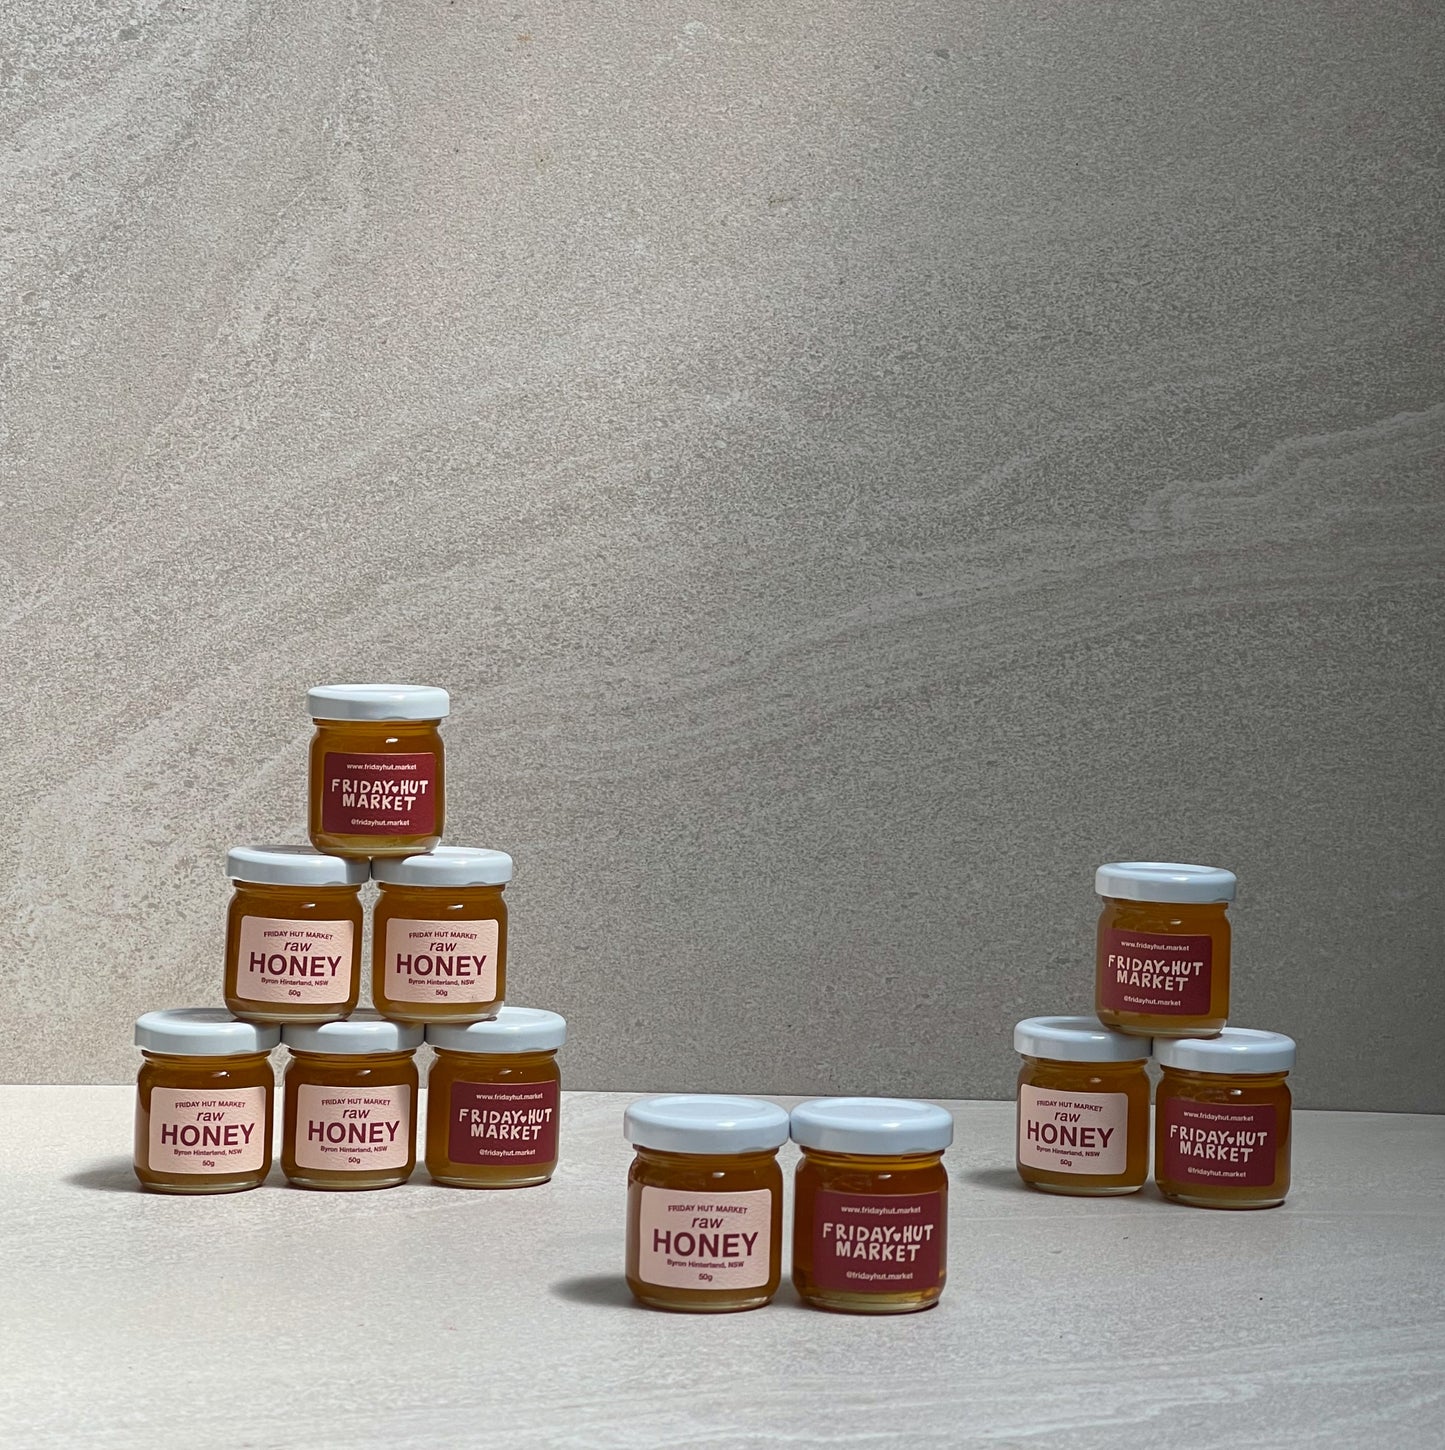 50g jars of Friday Hut Market Raw bush Honey are stacked on top of each other in a pyramid. 